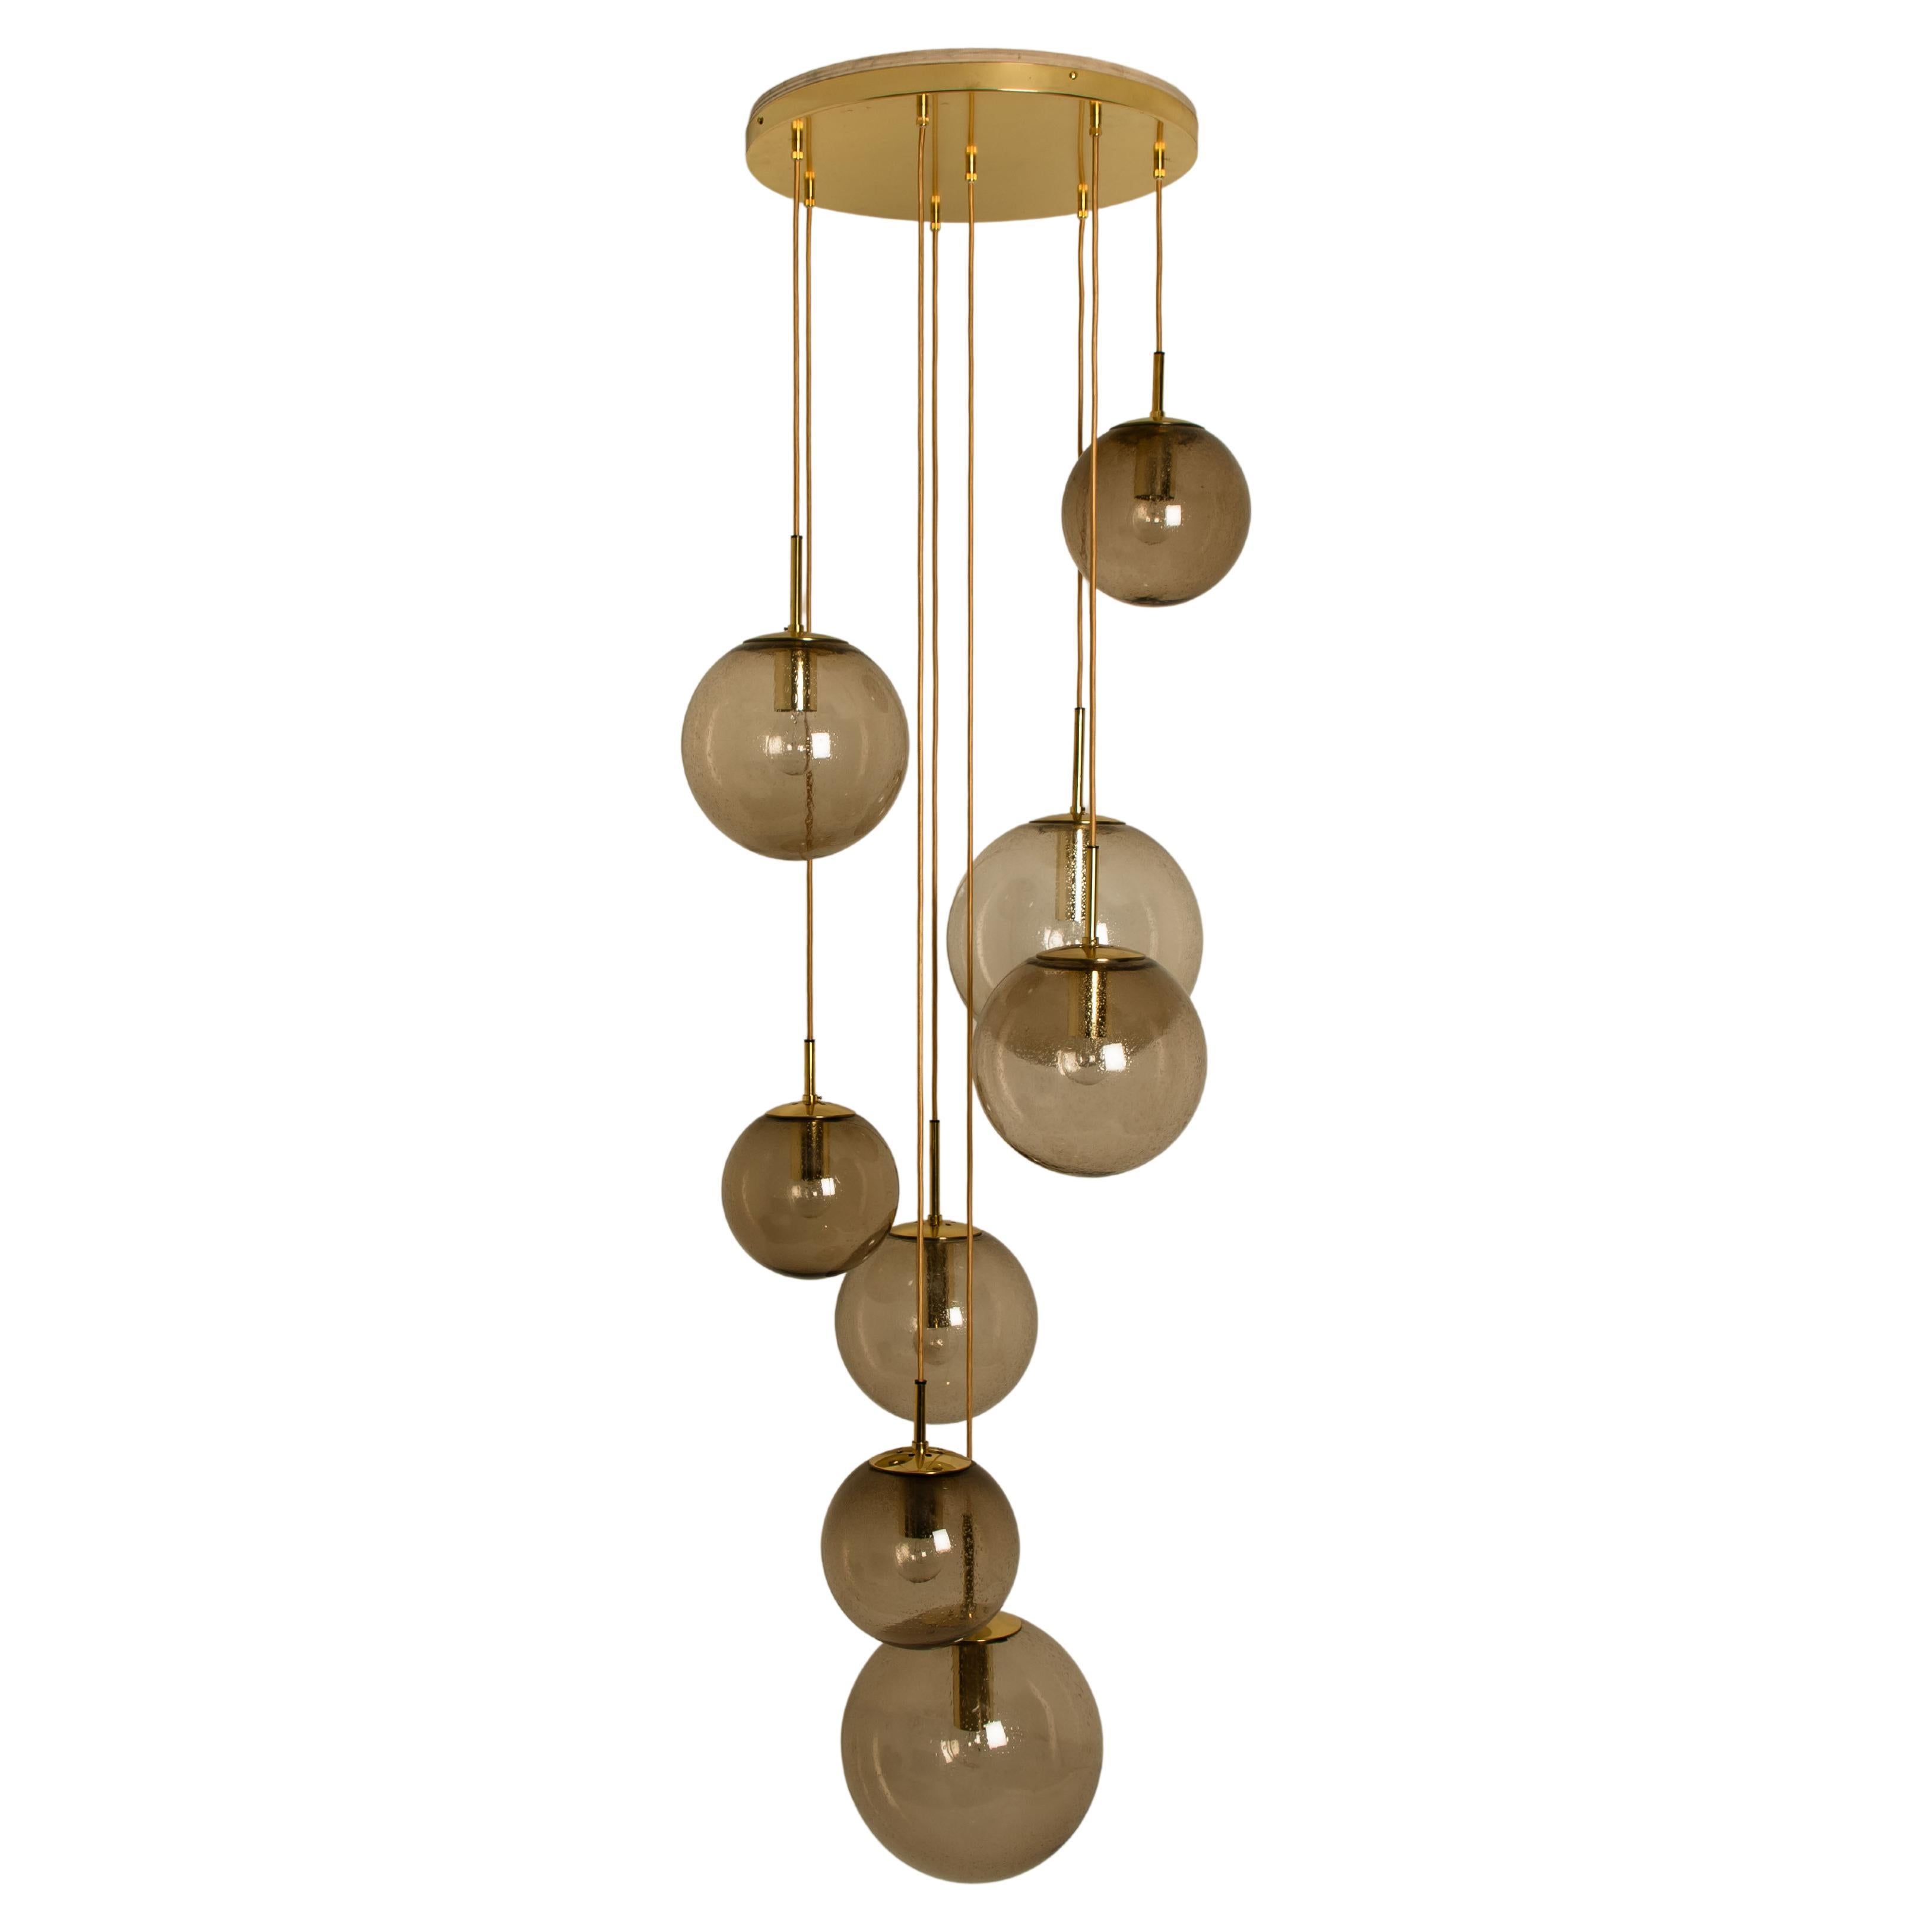 Mid-20th Century Chandeliers and Pendants